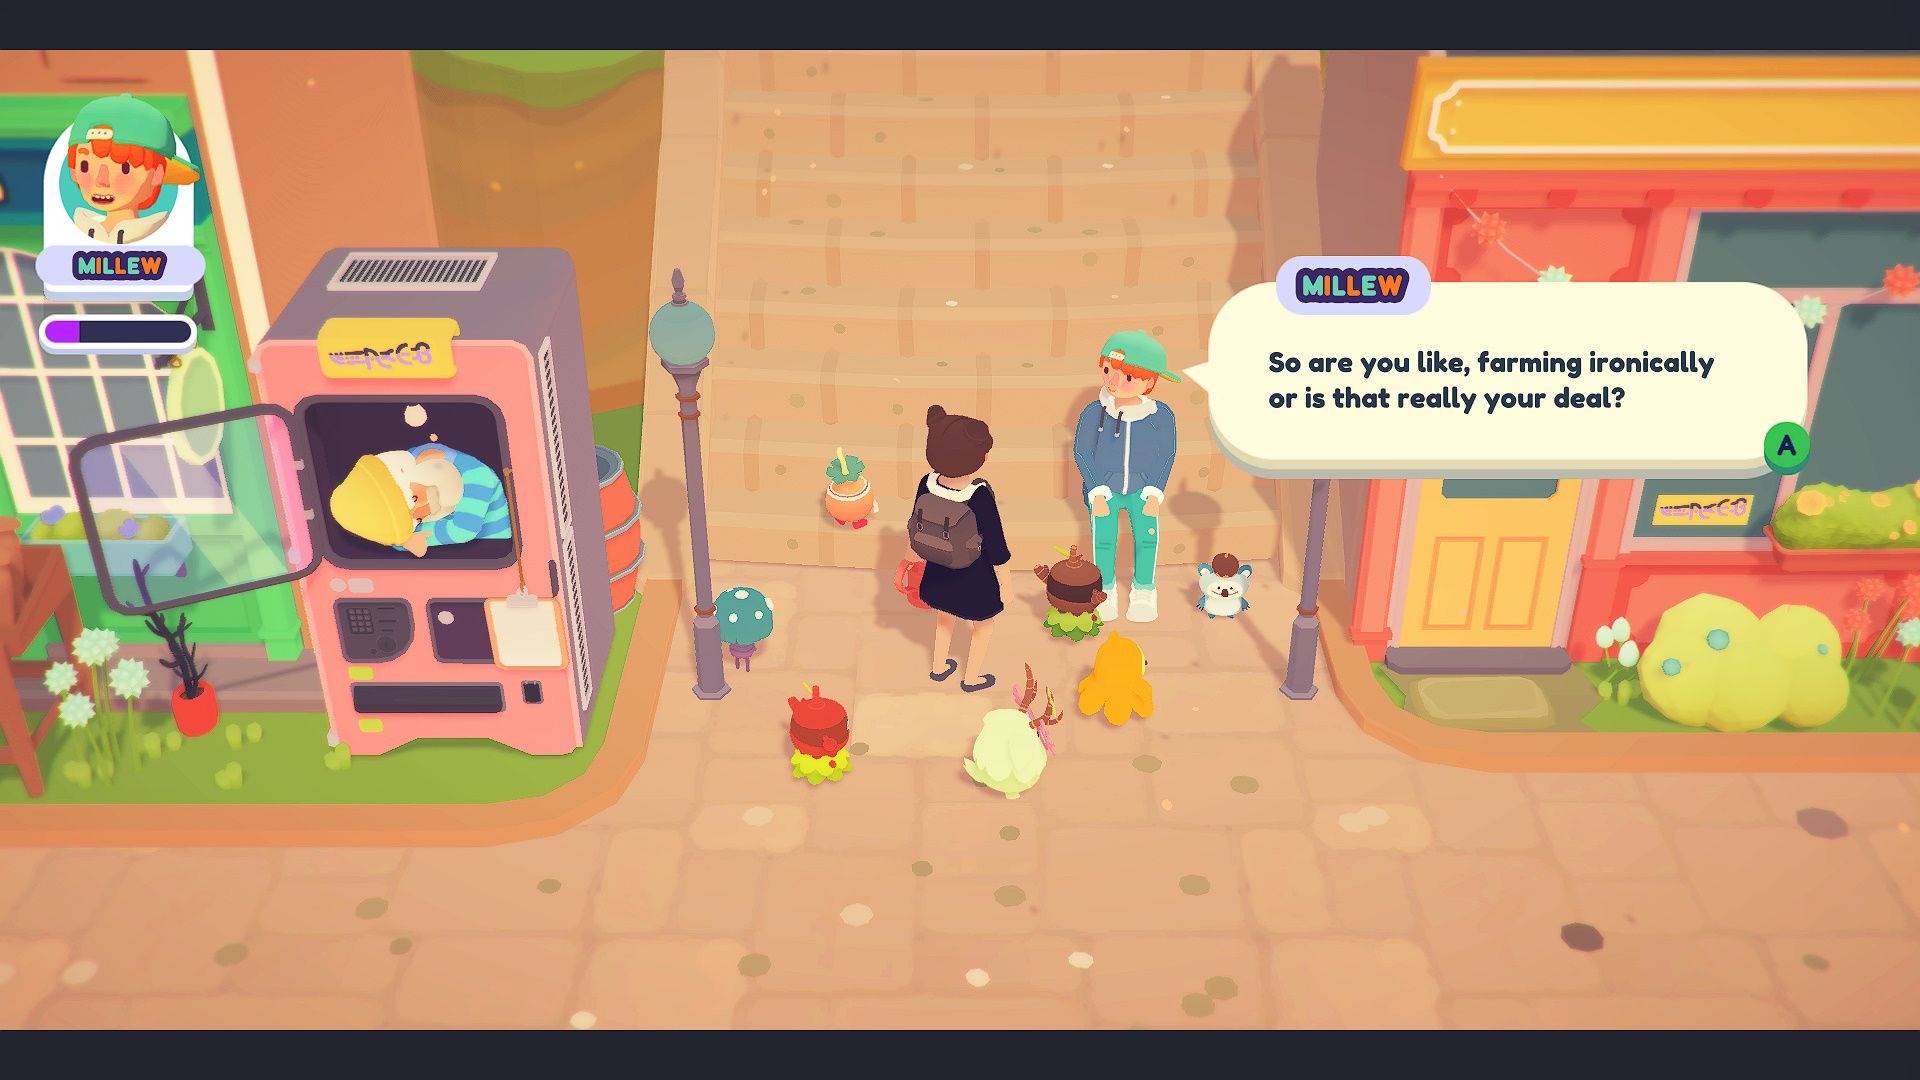 Ooblets in-game dialogue.